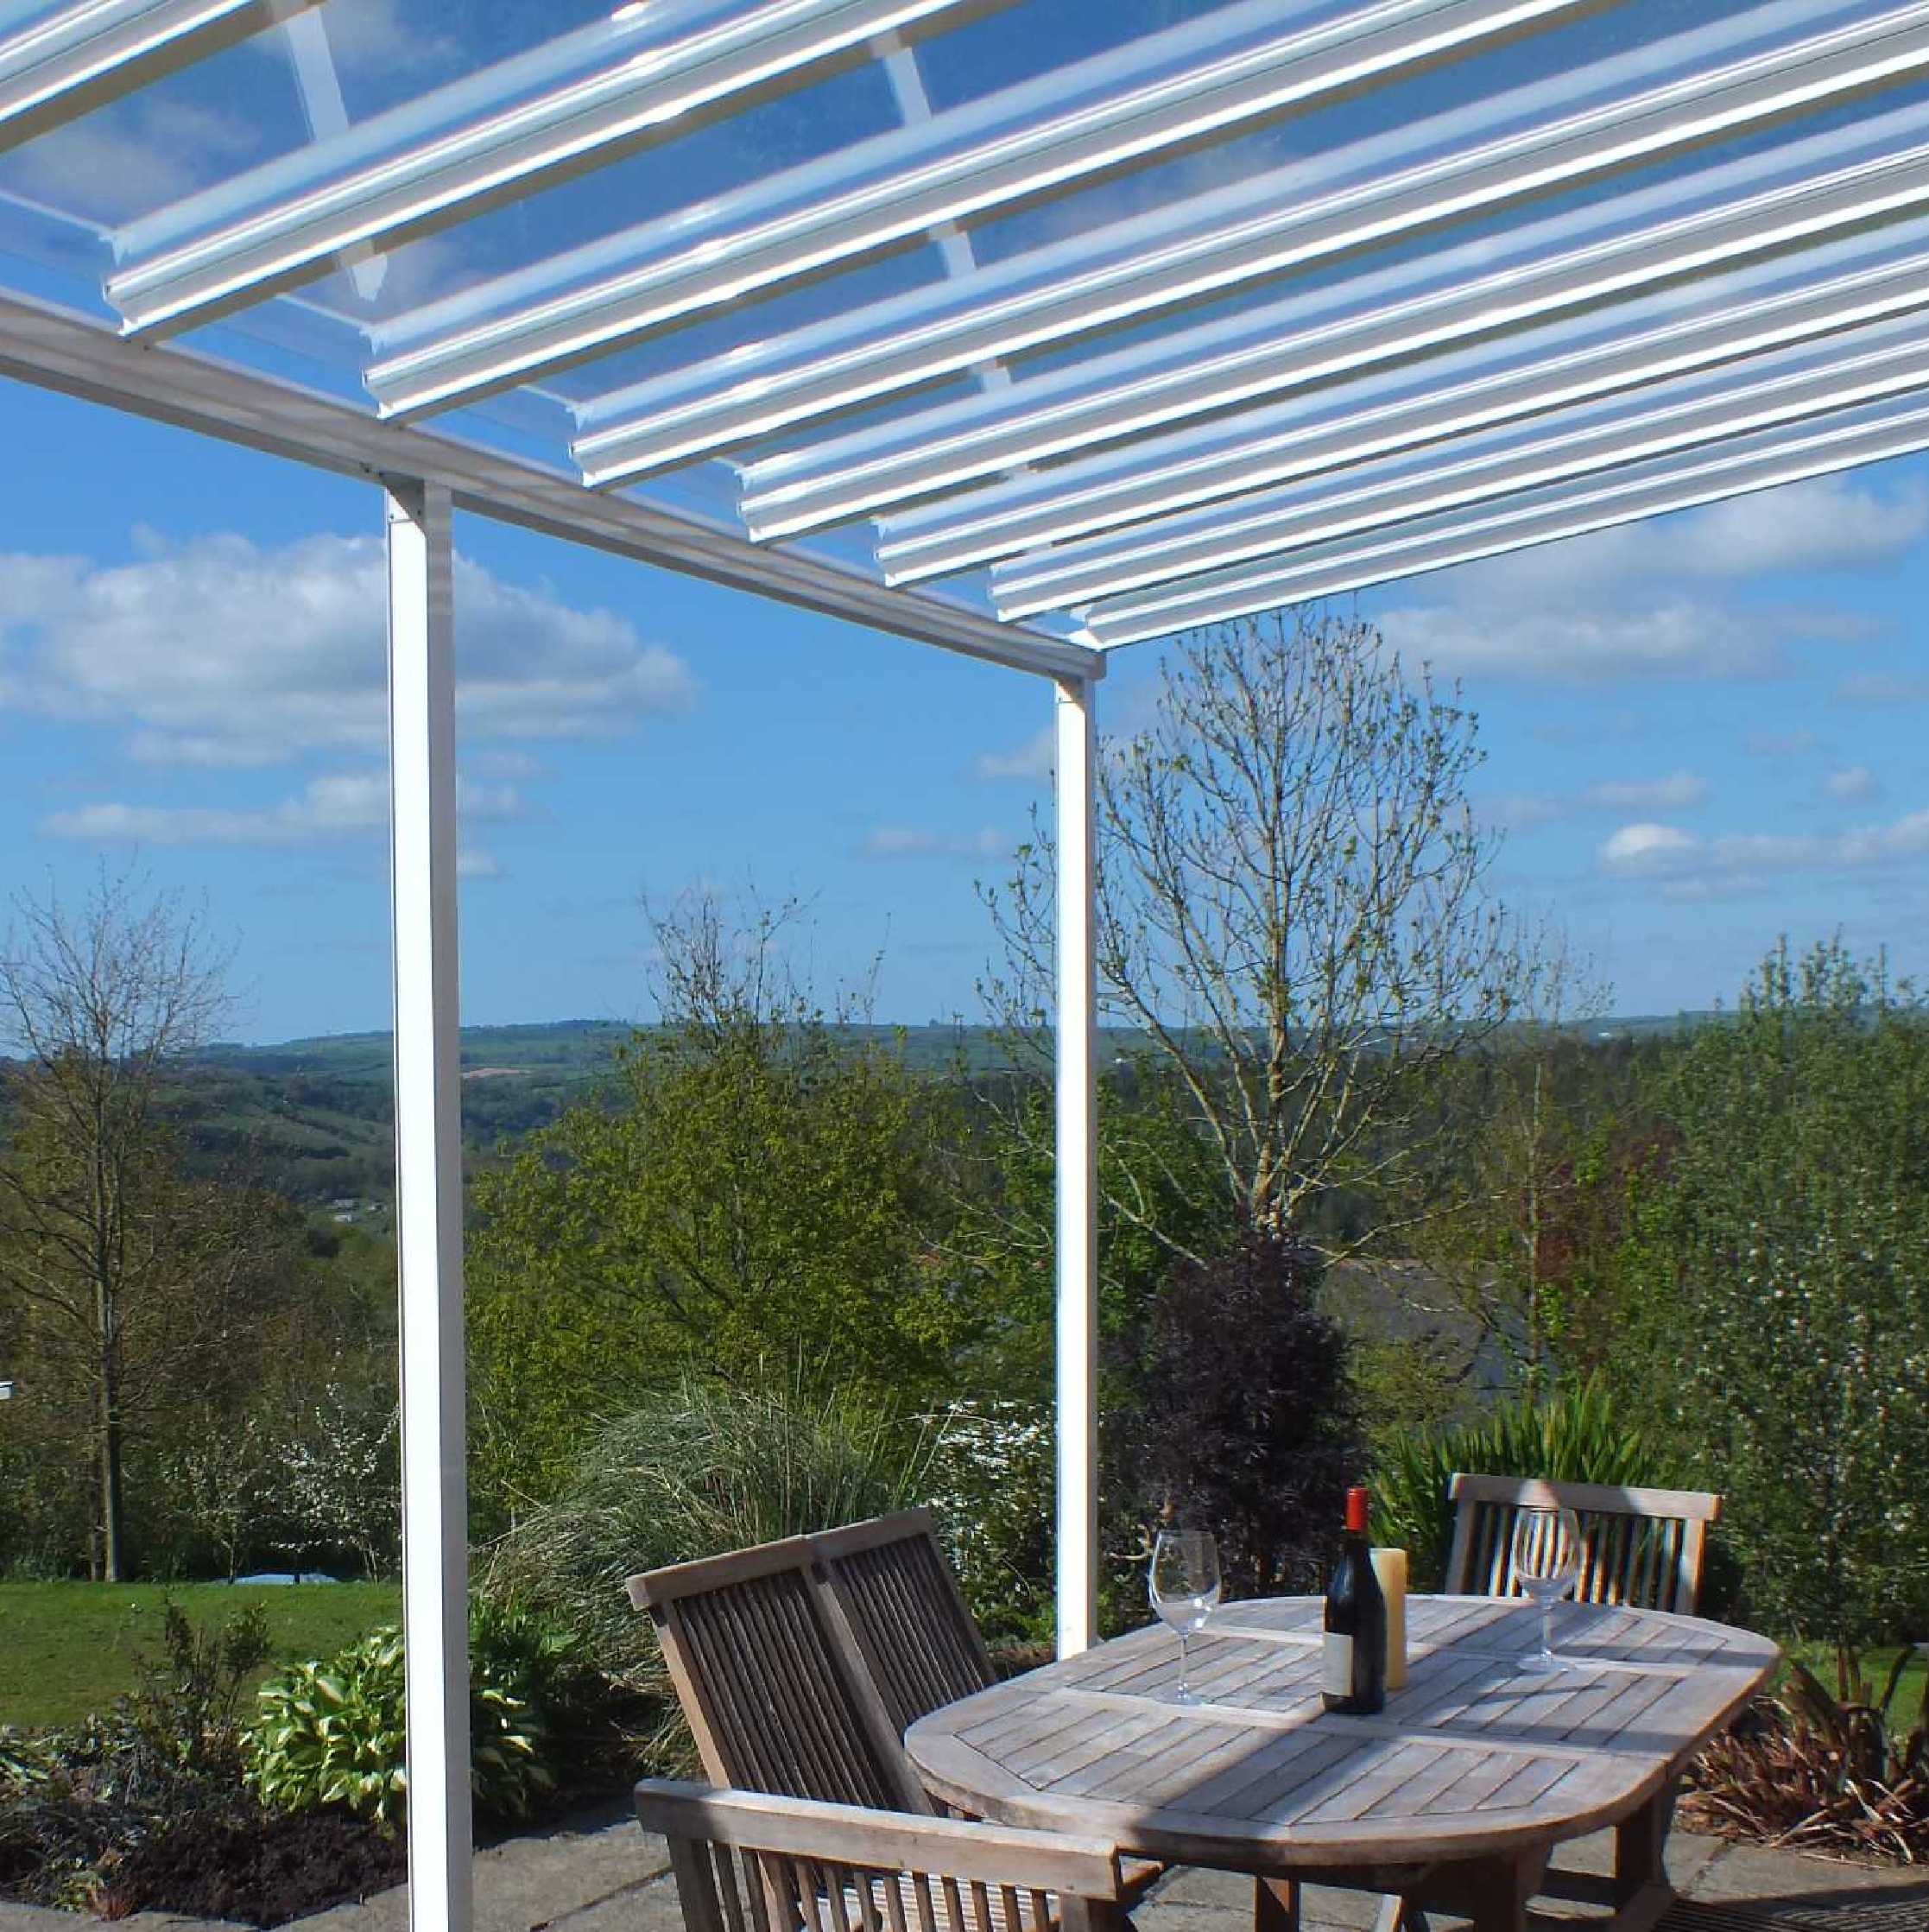 Buy Omega Smart Lean-To Canopy, White with 6mm Glass Clear Plate Polycarbonate Glazing - 9.8m (W) x 3.0m (P), (5) Supporting Posts online today